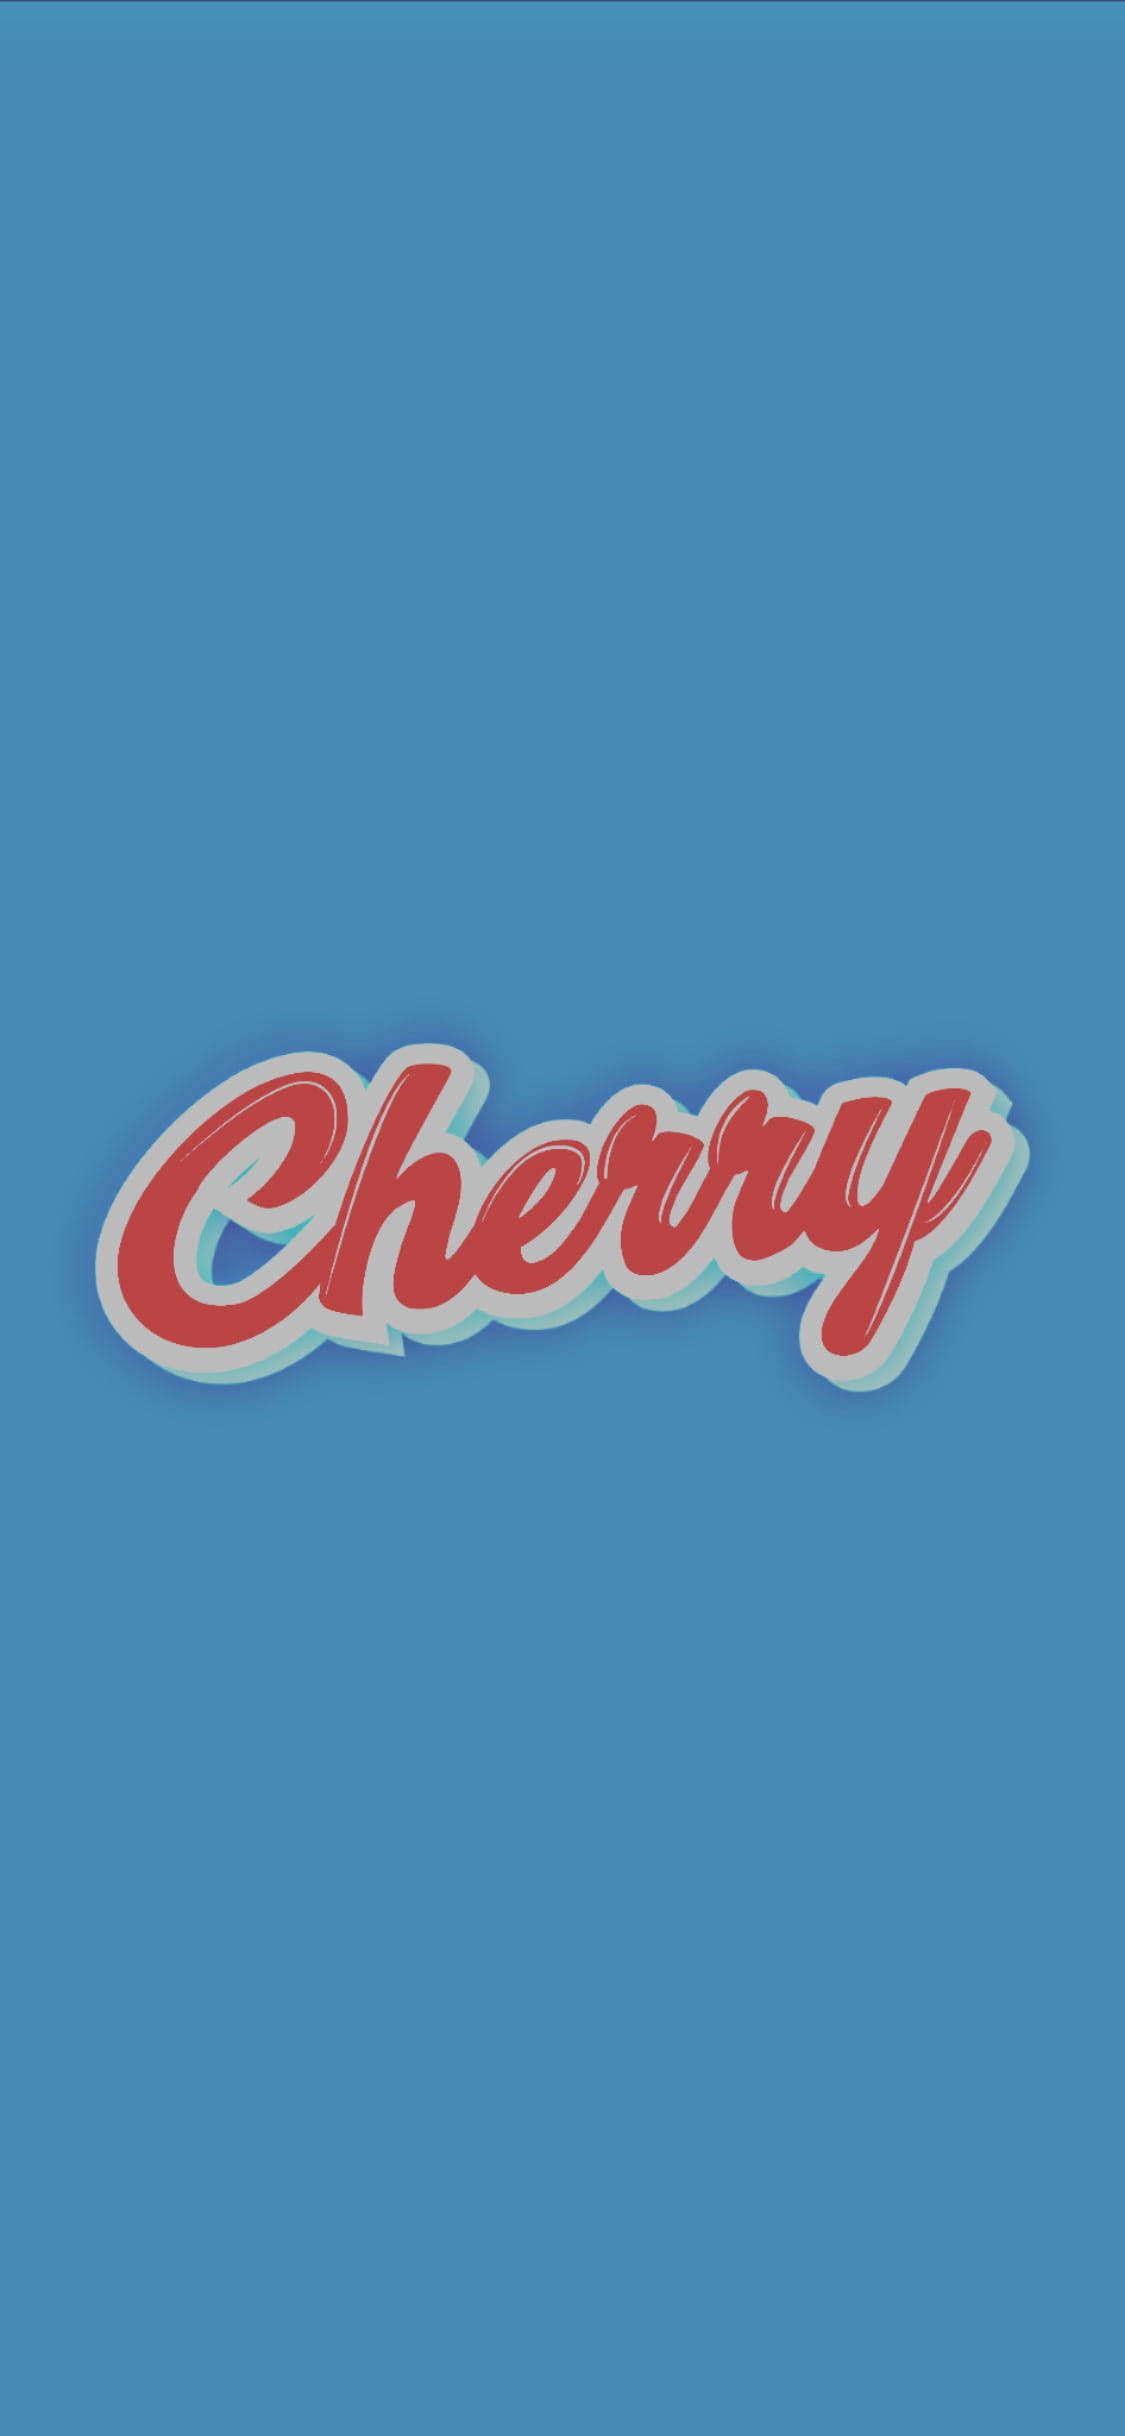 Download Cherry Simple Blue Aesthetic Wallpaper